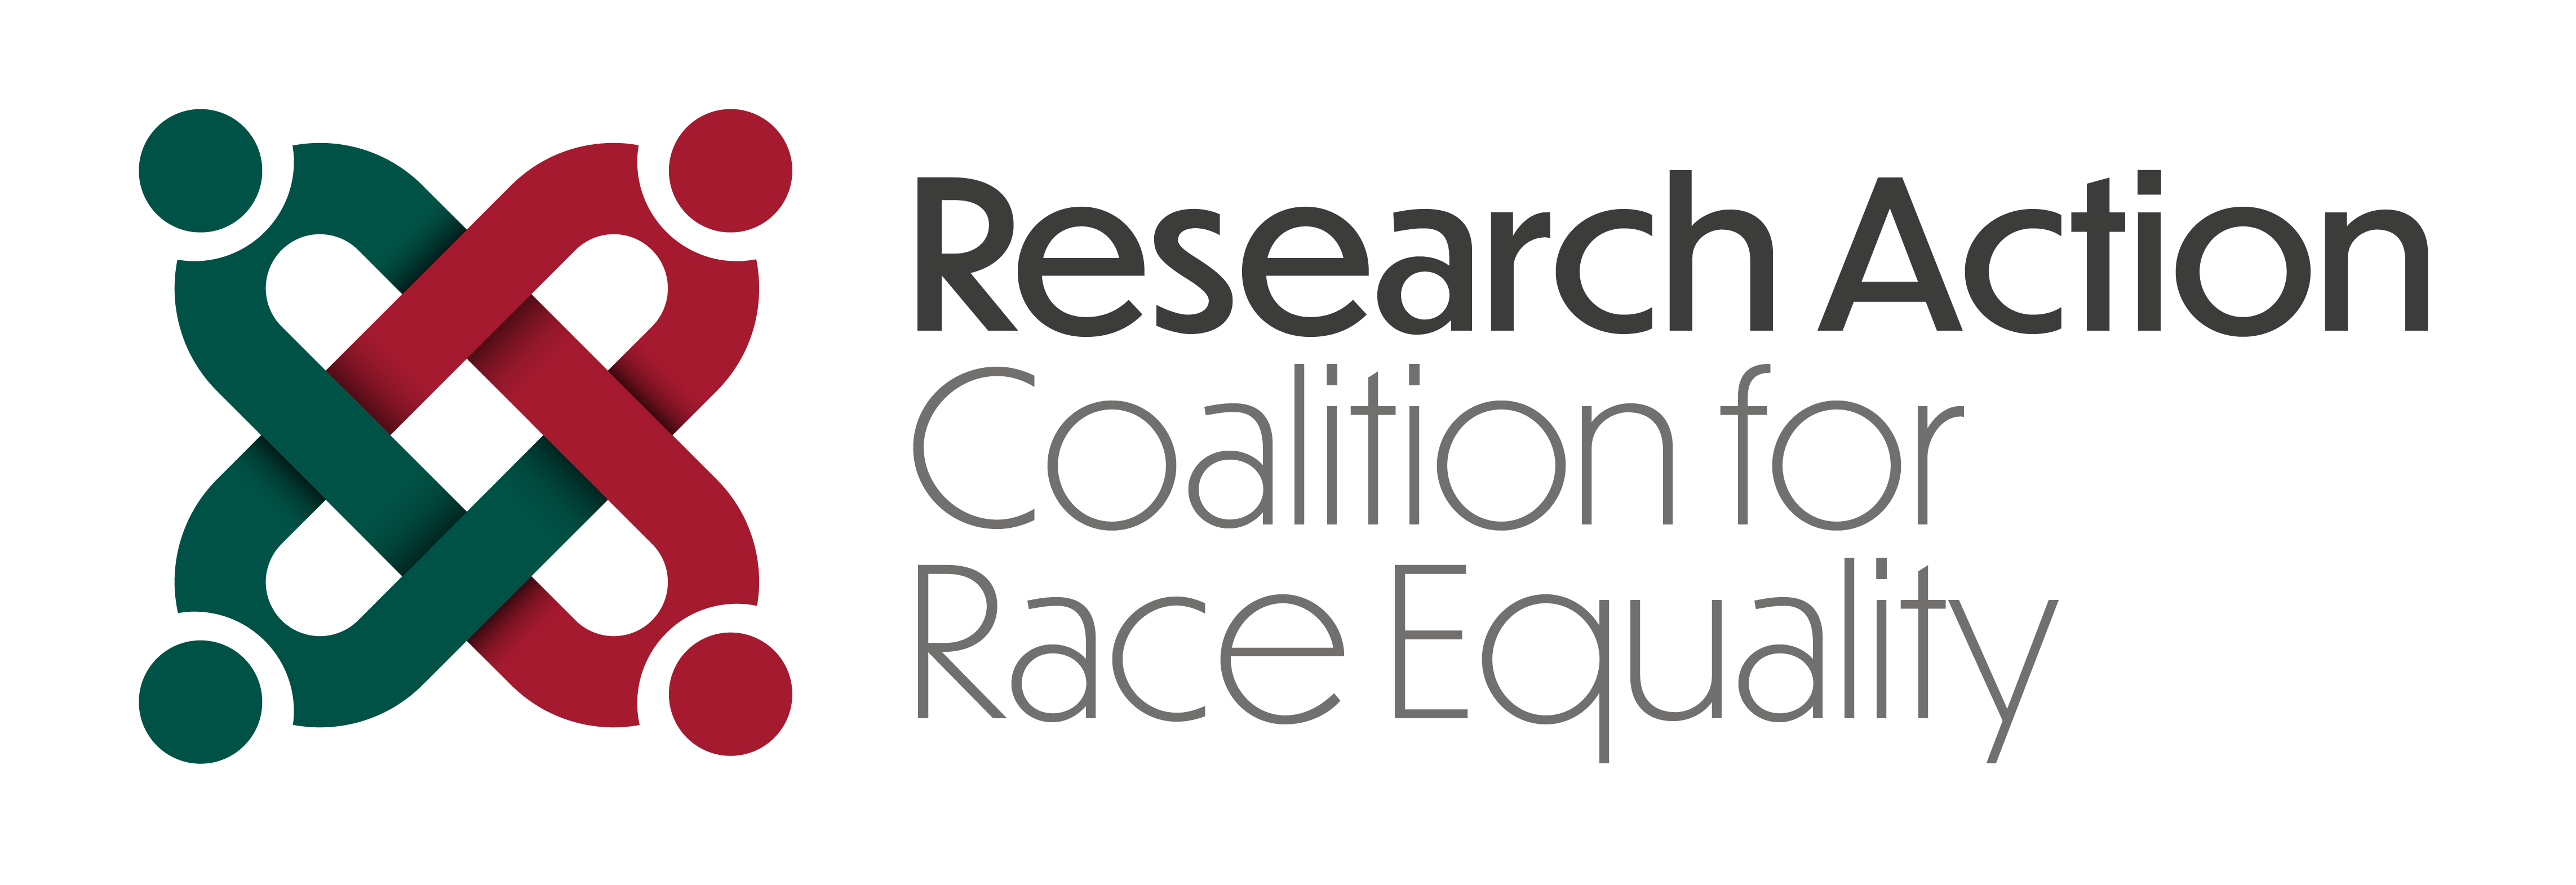 Research Action Coalition for Race Equality RACE logo